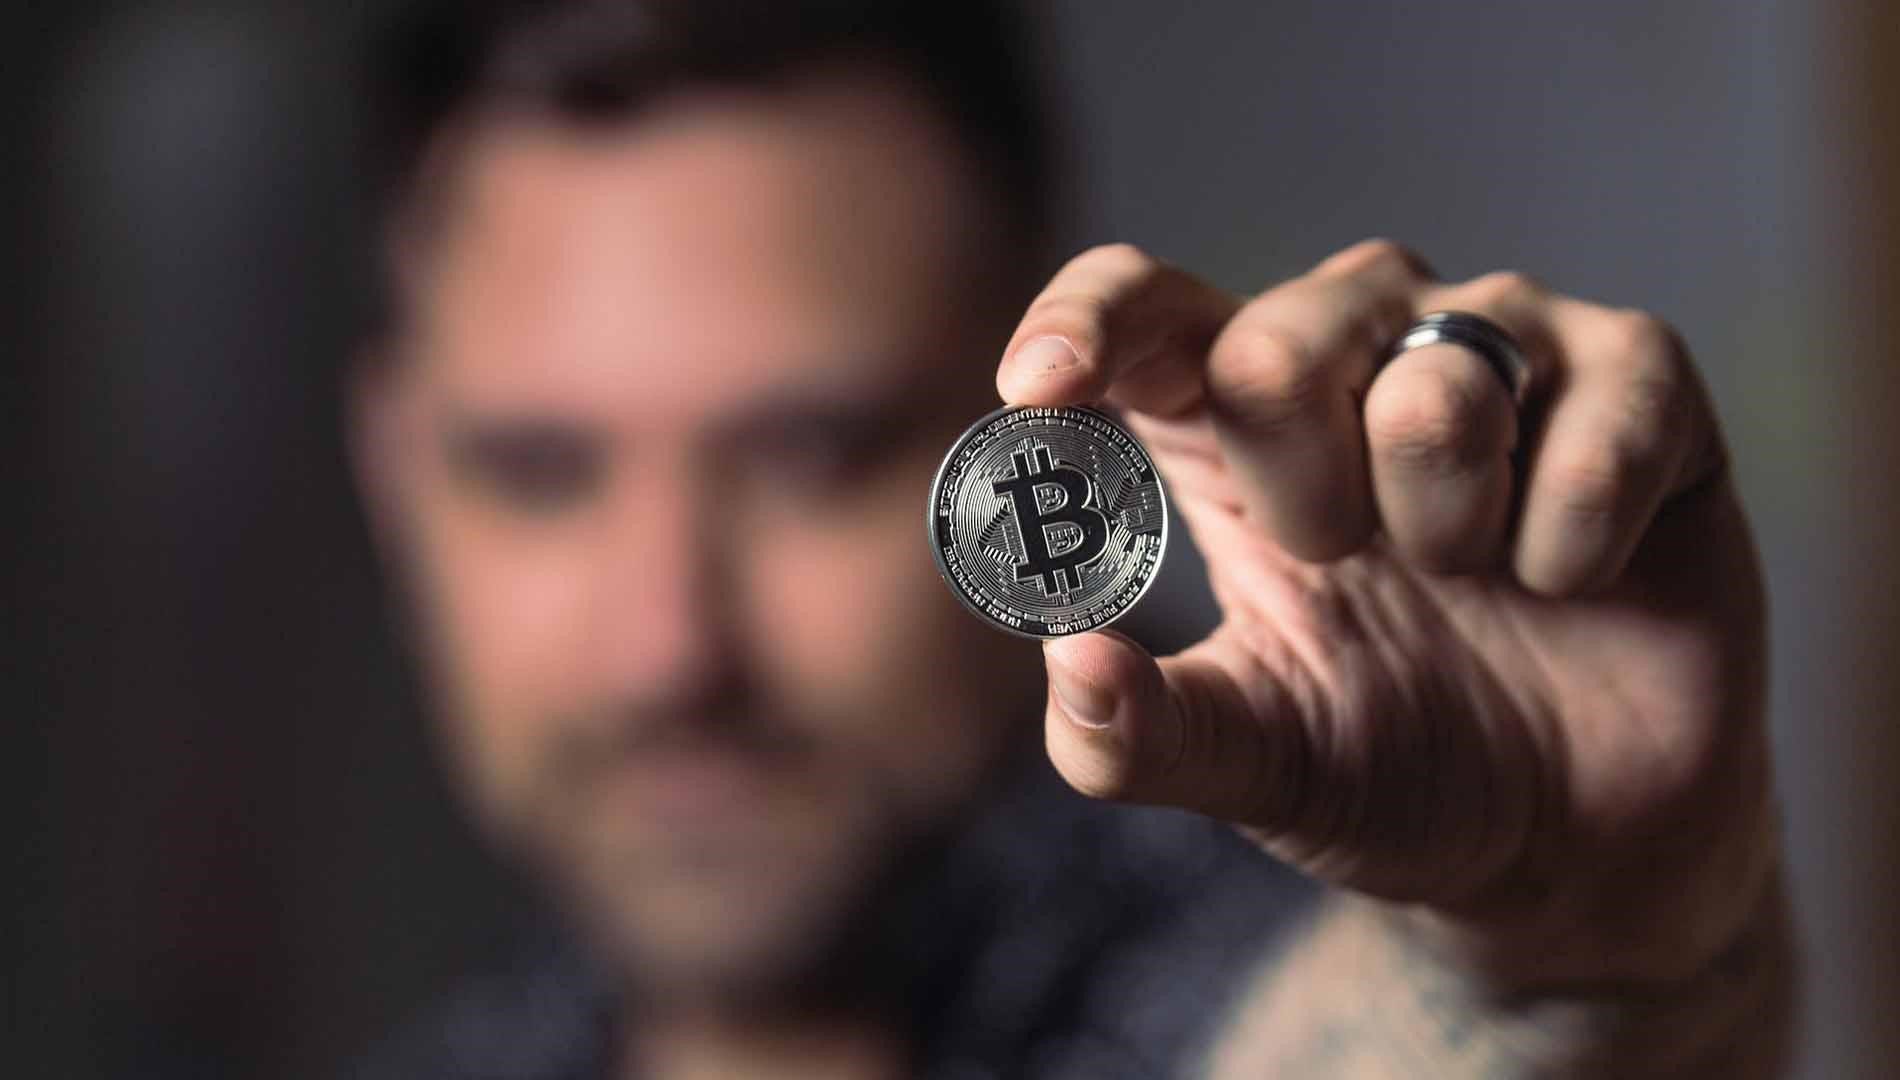 A man holding a silver coin with the bitcoin logo on it